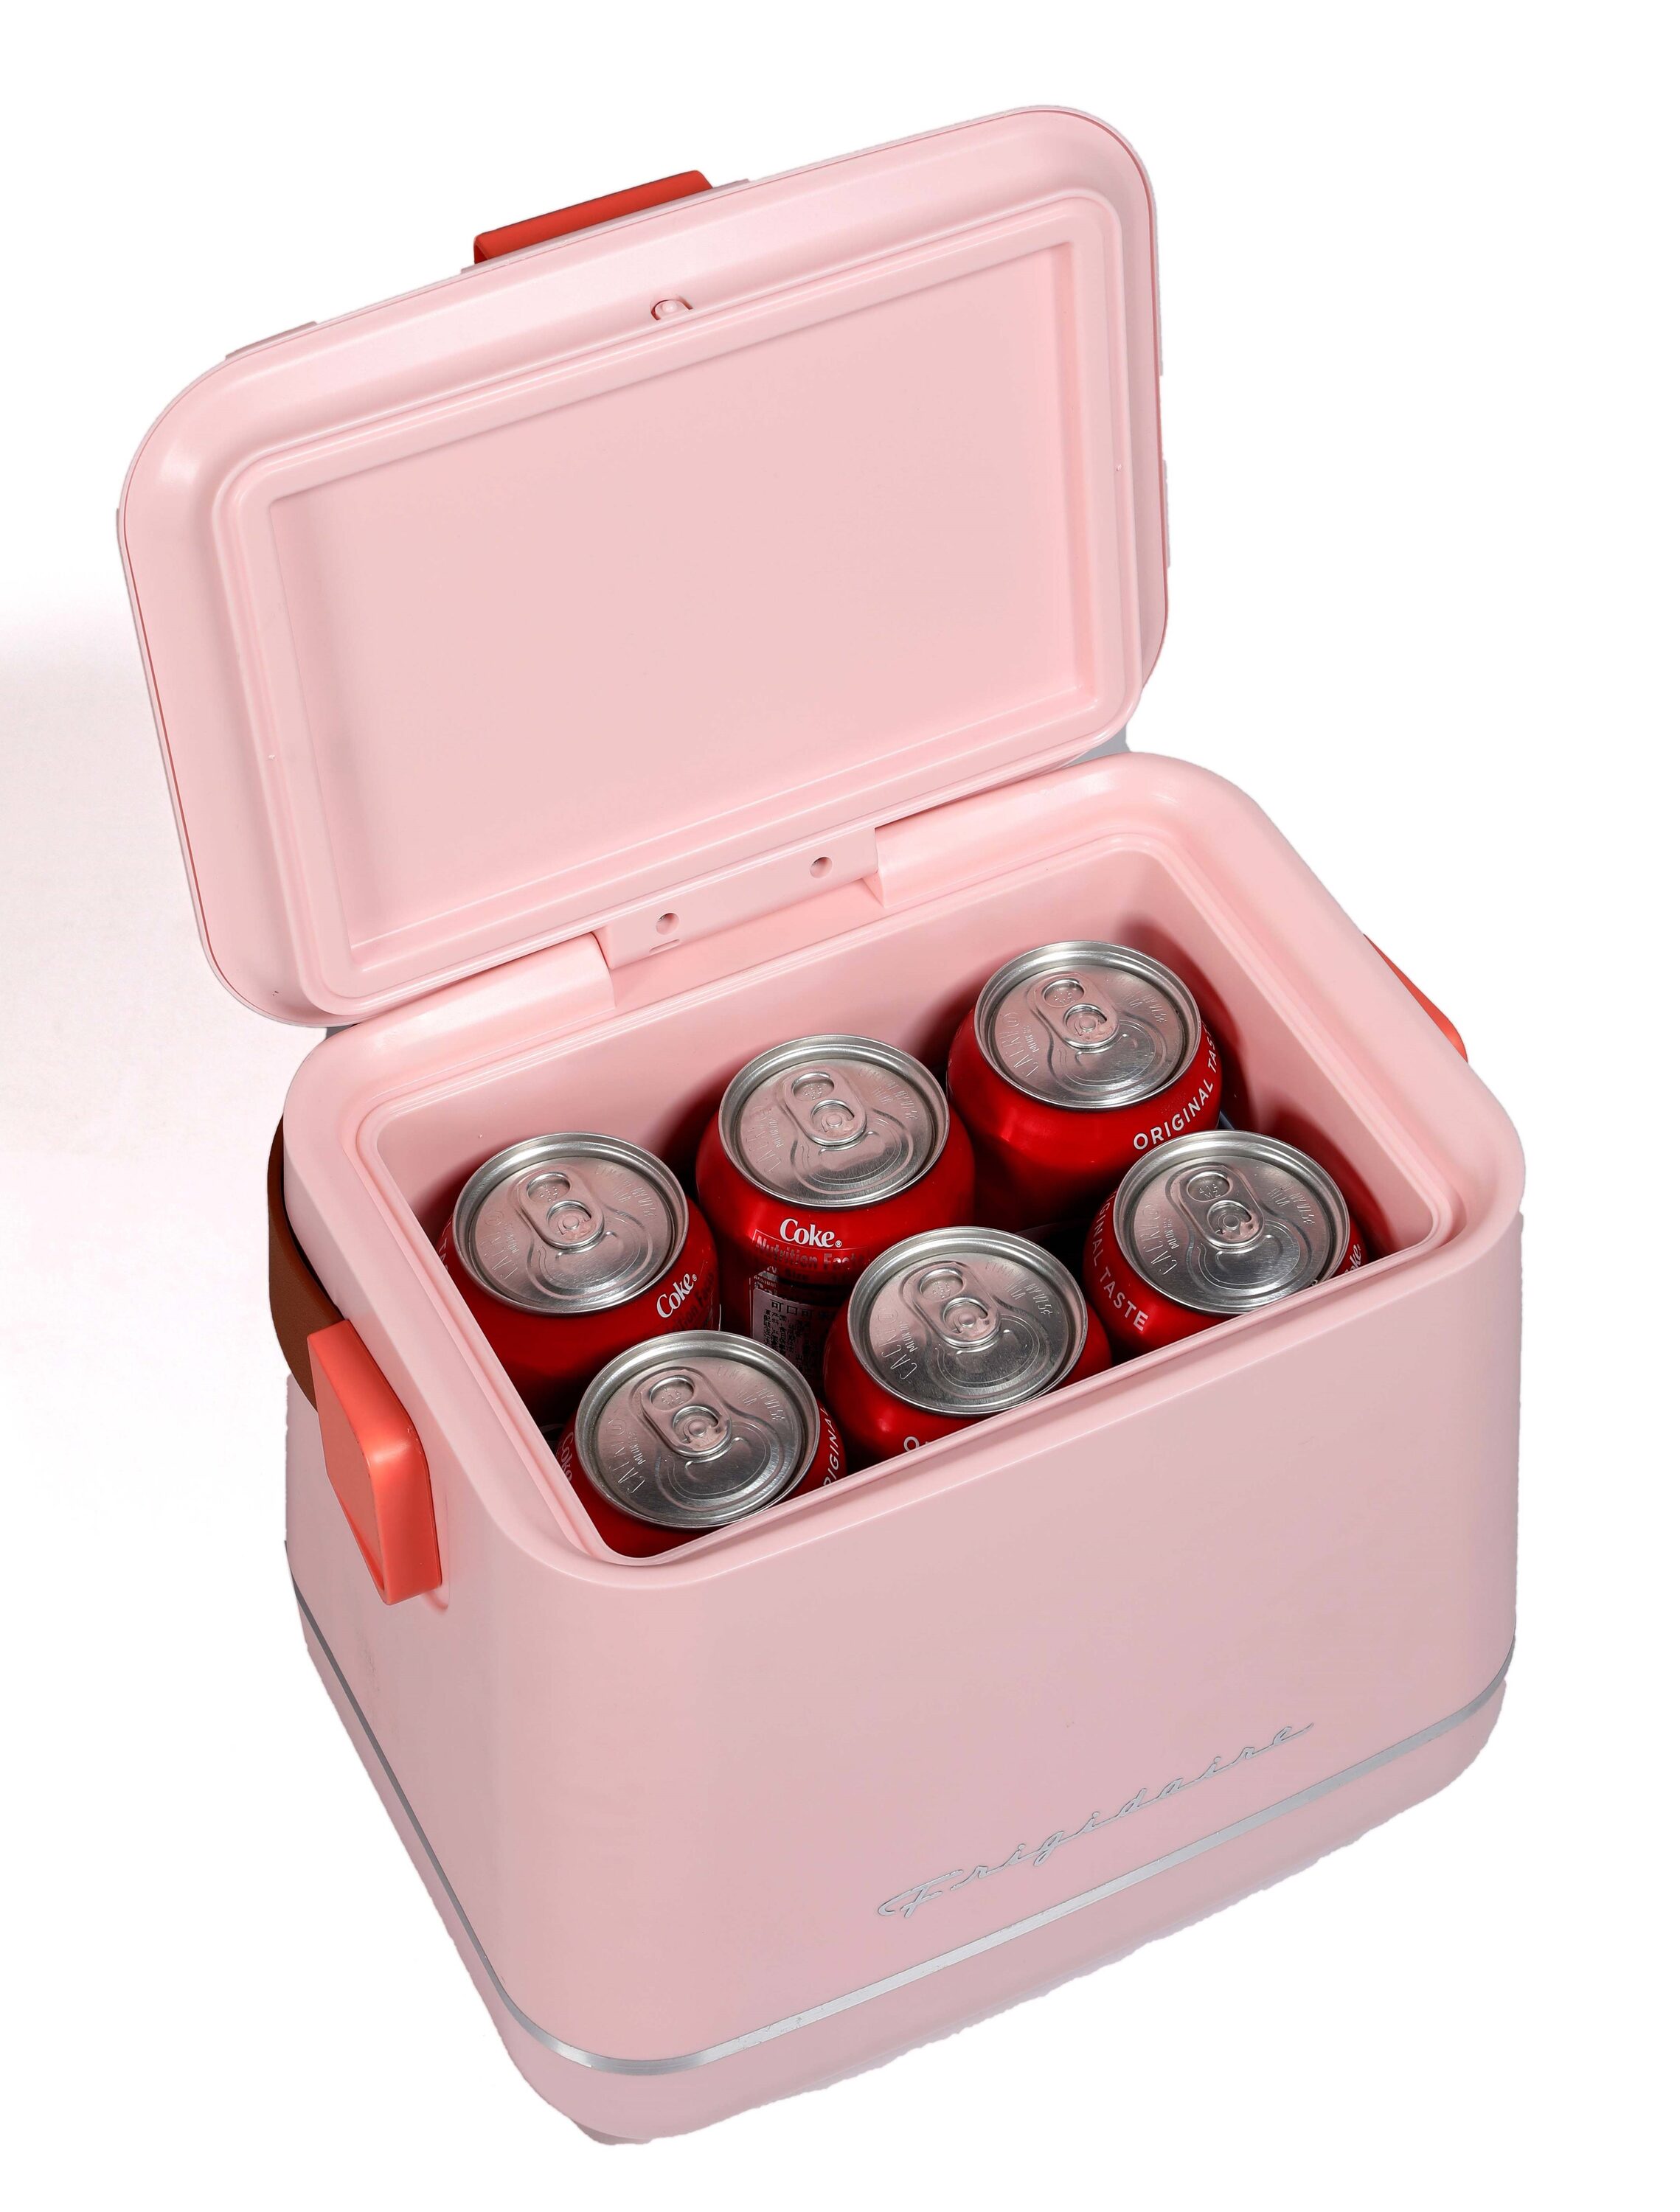 Frigidaire Top Opening 6-Can Insulated Beverage Cooler ,Pink